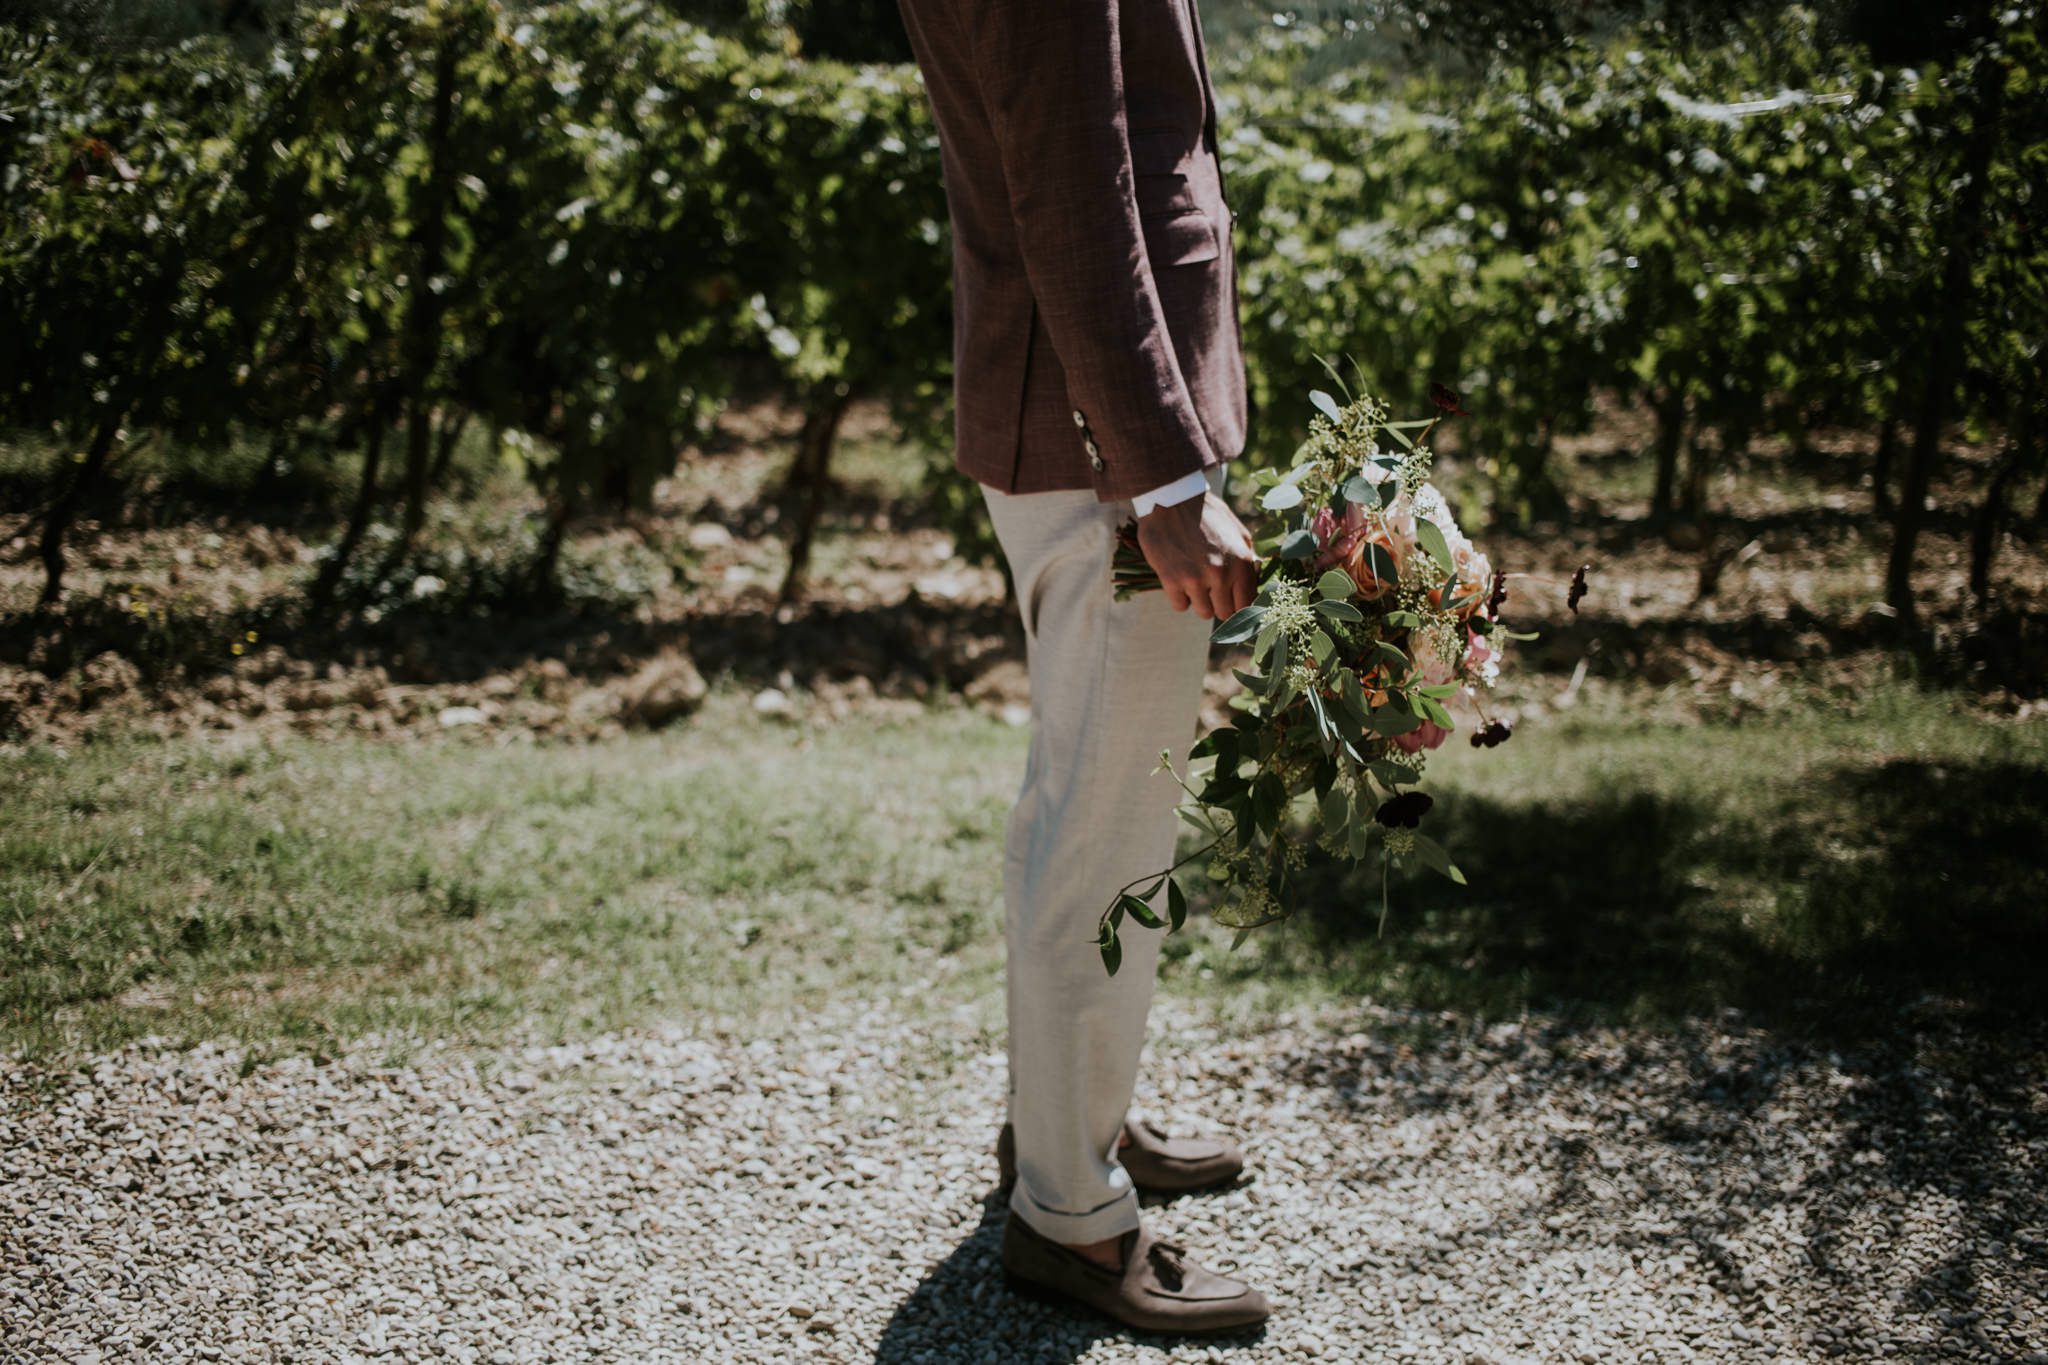 Groom waits for bride with flowers in his hand before his wedding ceremony at Fattoria di Corsigano near Siena in Tuscany, Italy